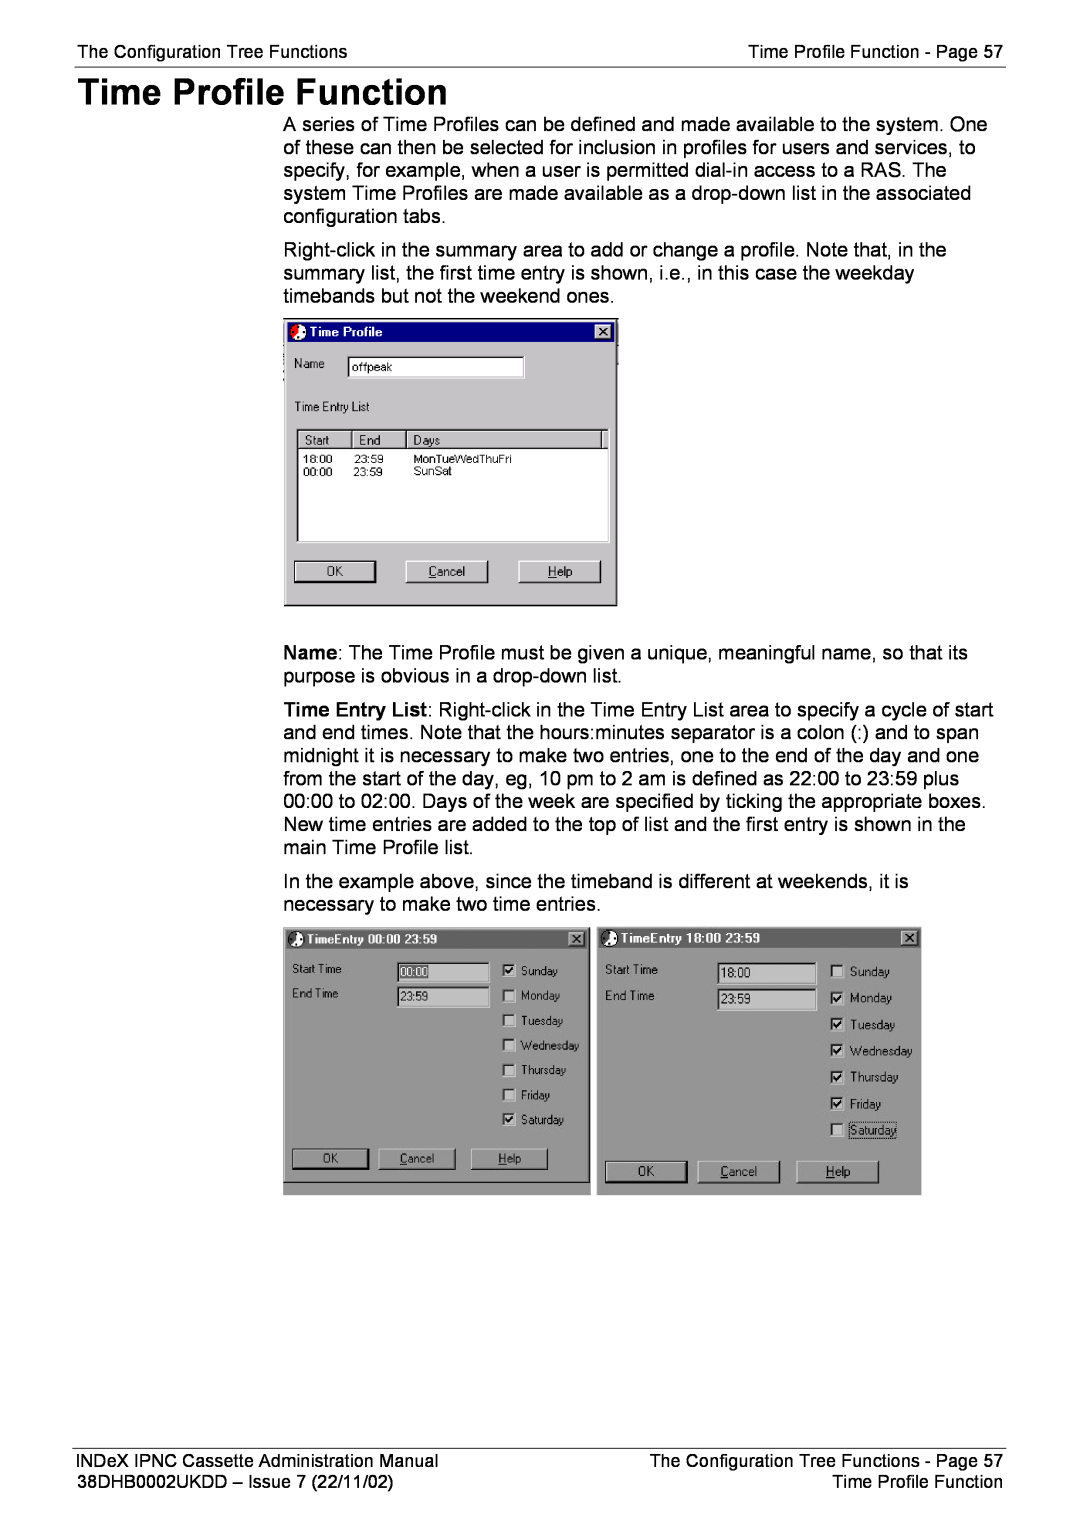 Avaya manual The Configuration Tree Functions, Time Profile Function - Page, 38DHB0002UKDD – Issue 7 22/11/02 